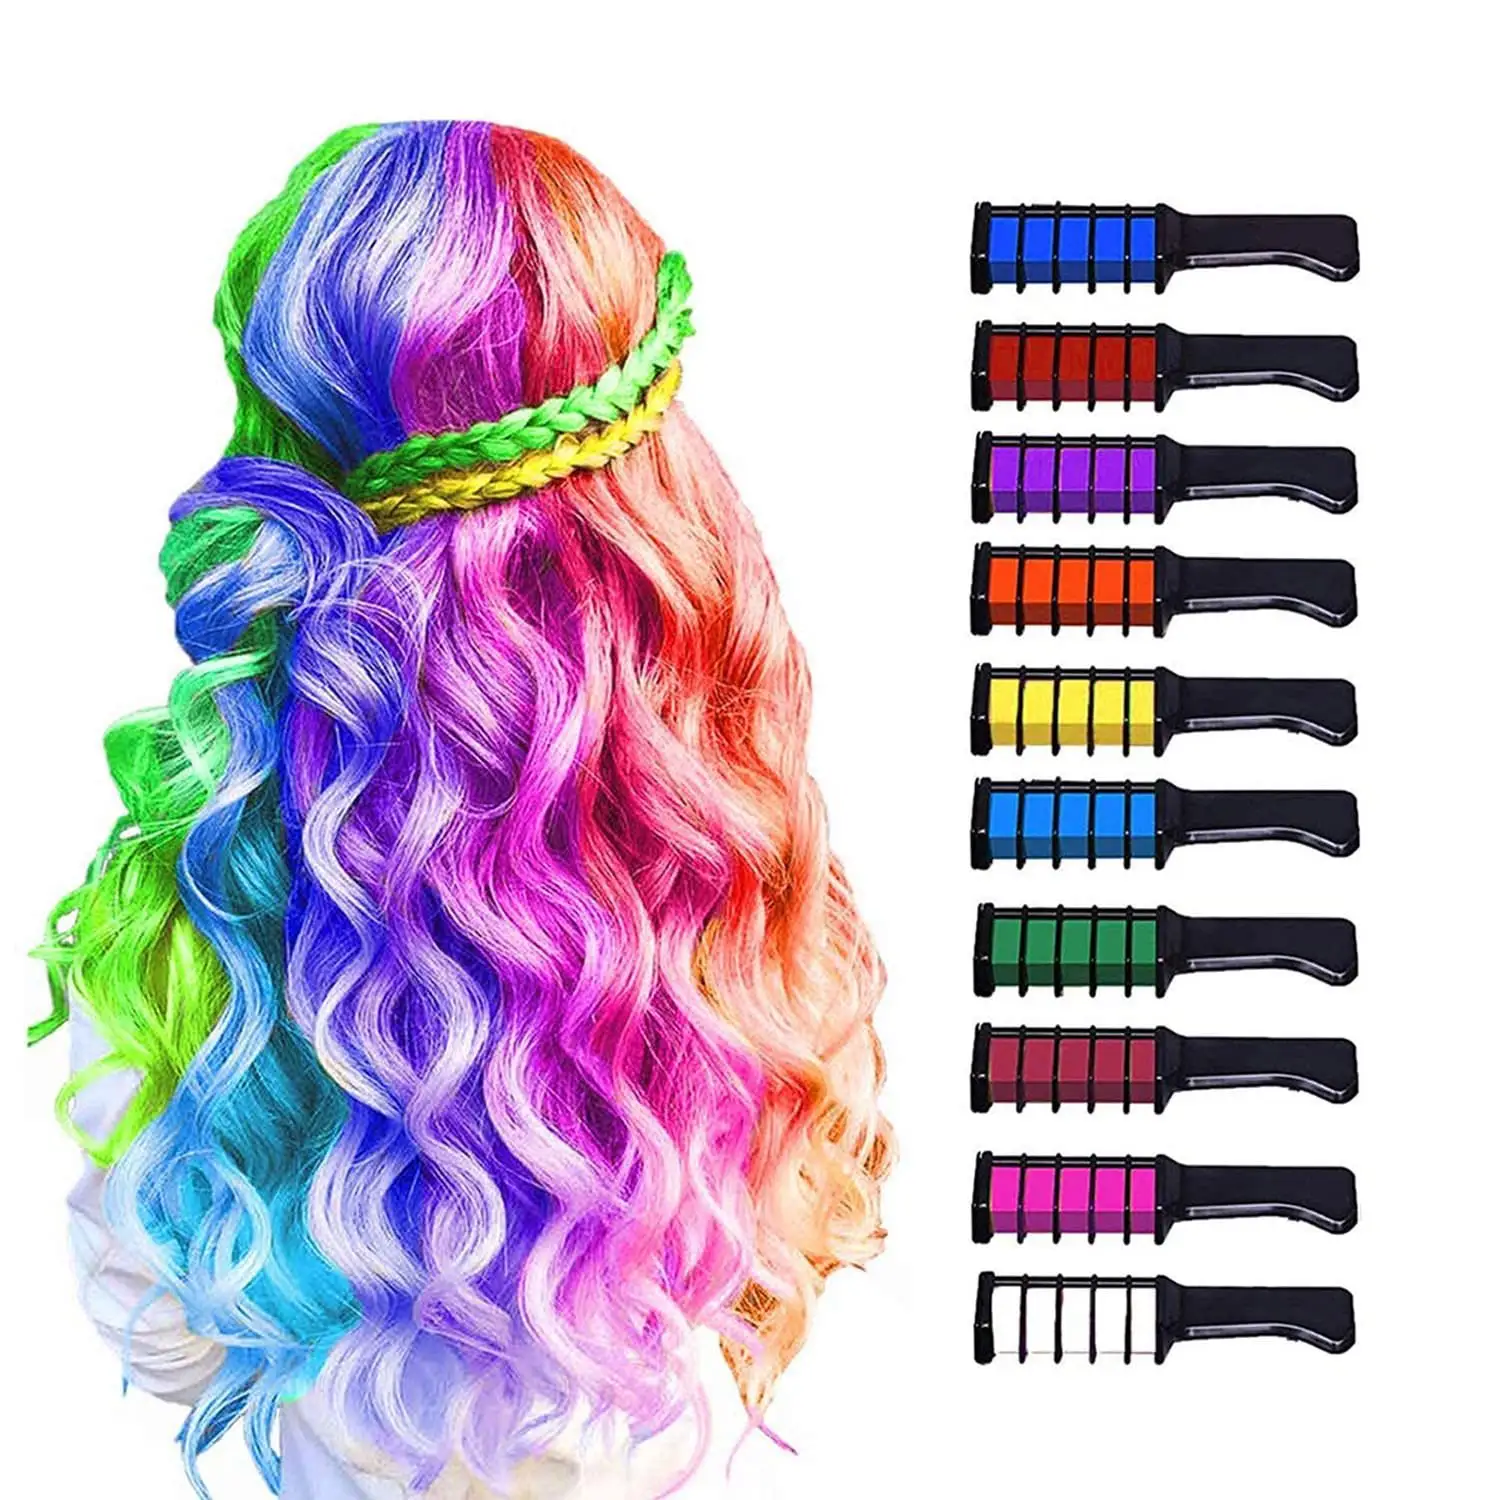 Multi Colors Disposable Holiday DIY Hair Chalk Comb Hair Color Dye For Kids Adults